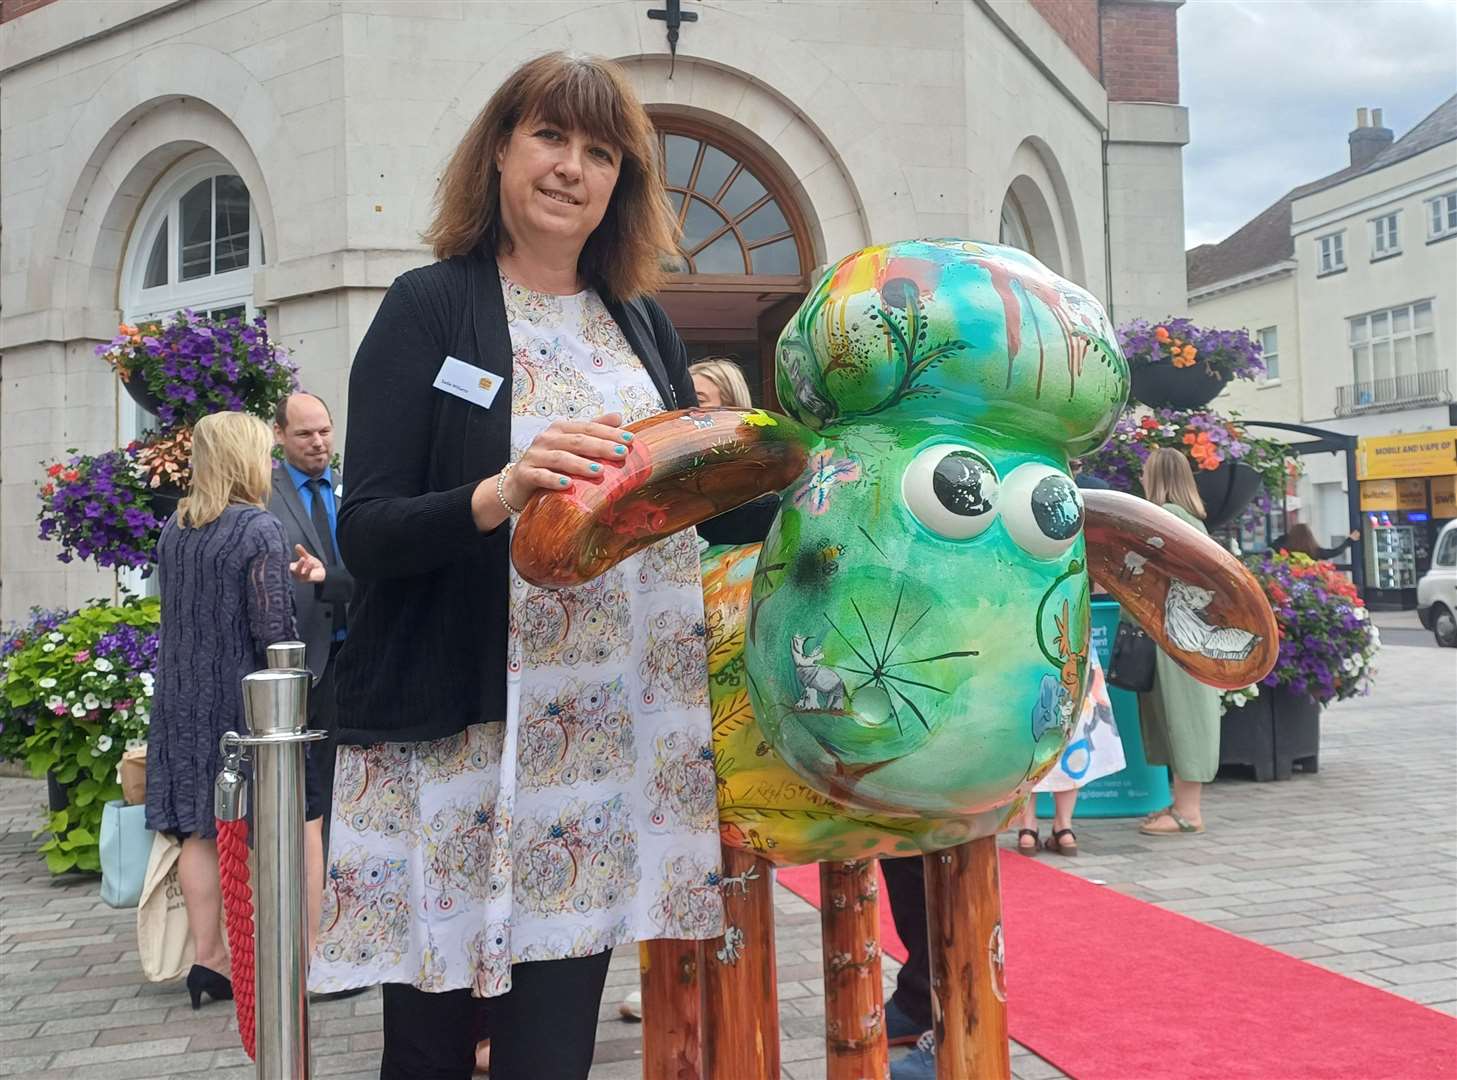 Sadie Williams designed Sheep-nanigans Shaun, helped by Hope Kinnersley and hand-finished by Ralph Steadman